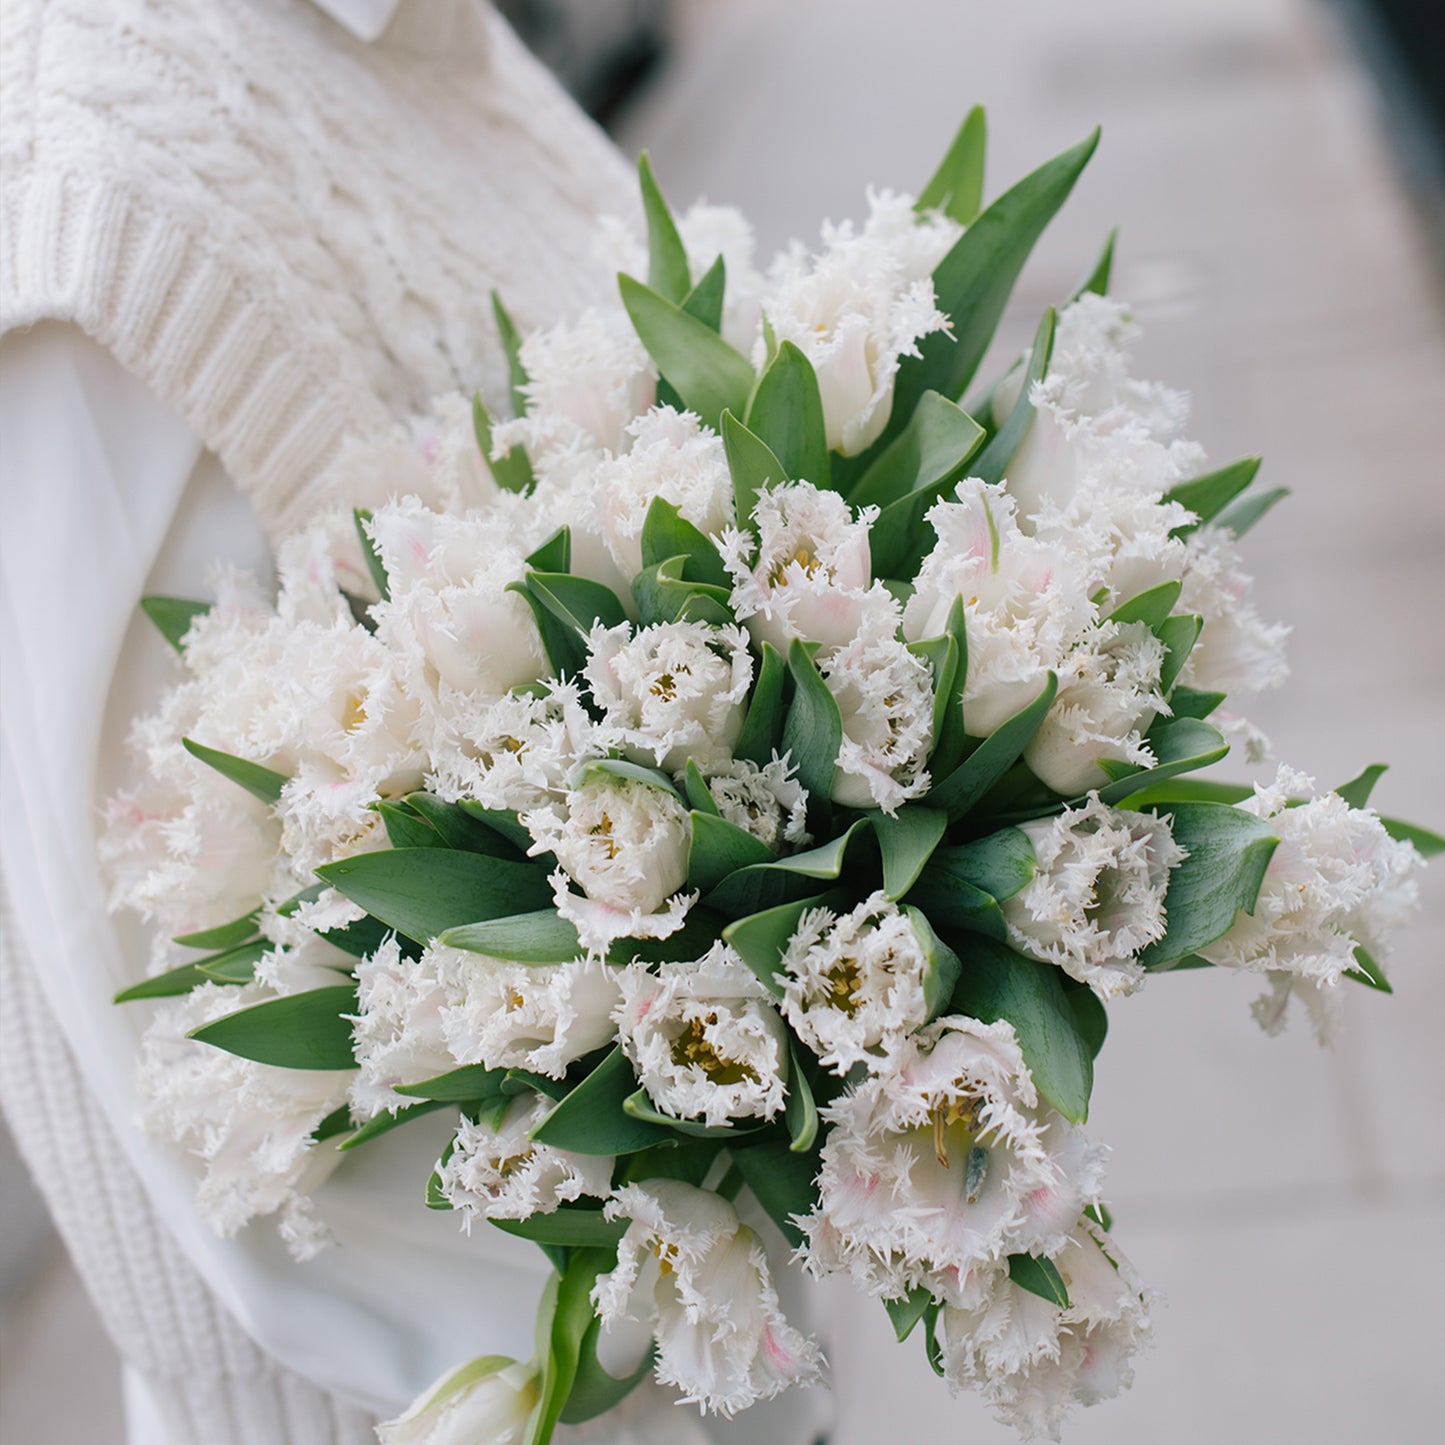 Experience the beauty of spring with our limited edition fringed soft tulips in fresh white. This stunning bouquet features carefully selected tulips with unique fringed petals, creating a one-of-a-kind display.